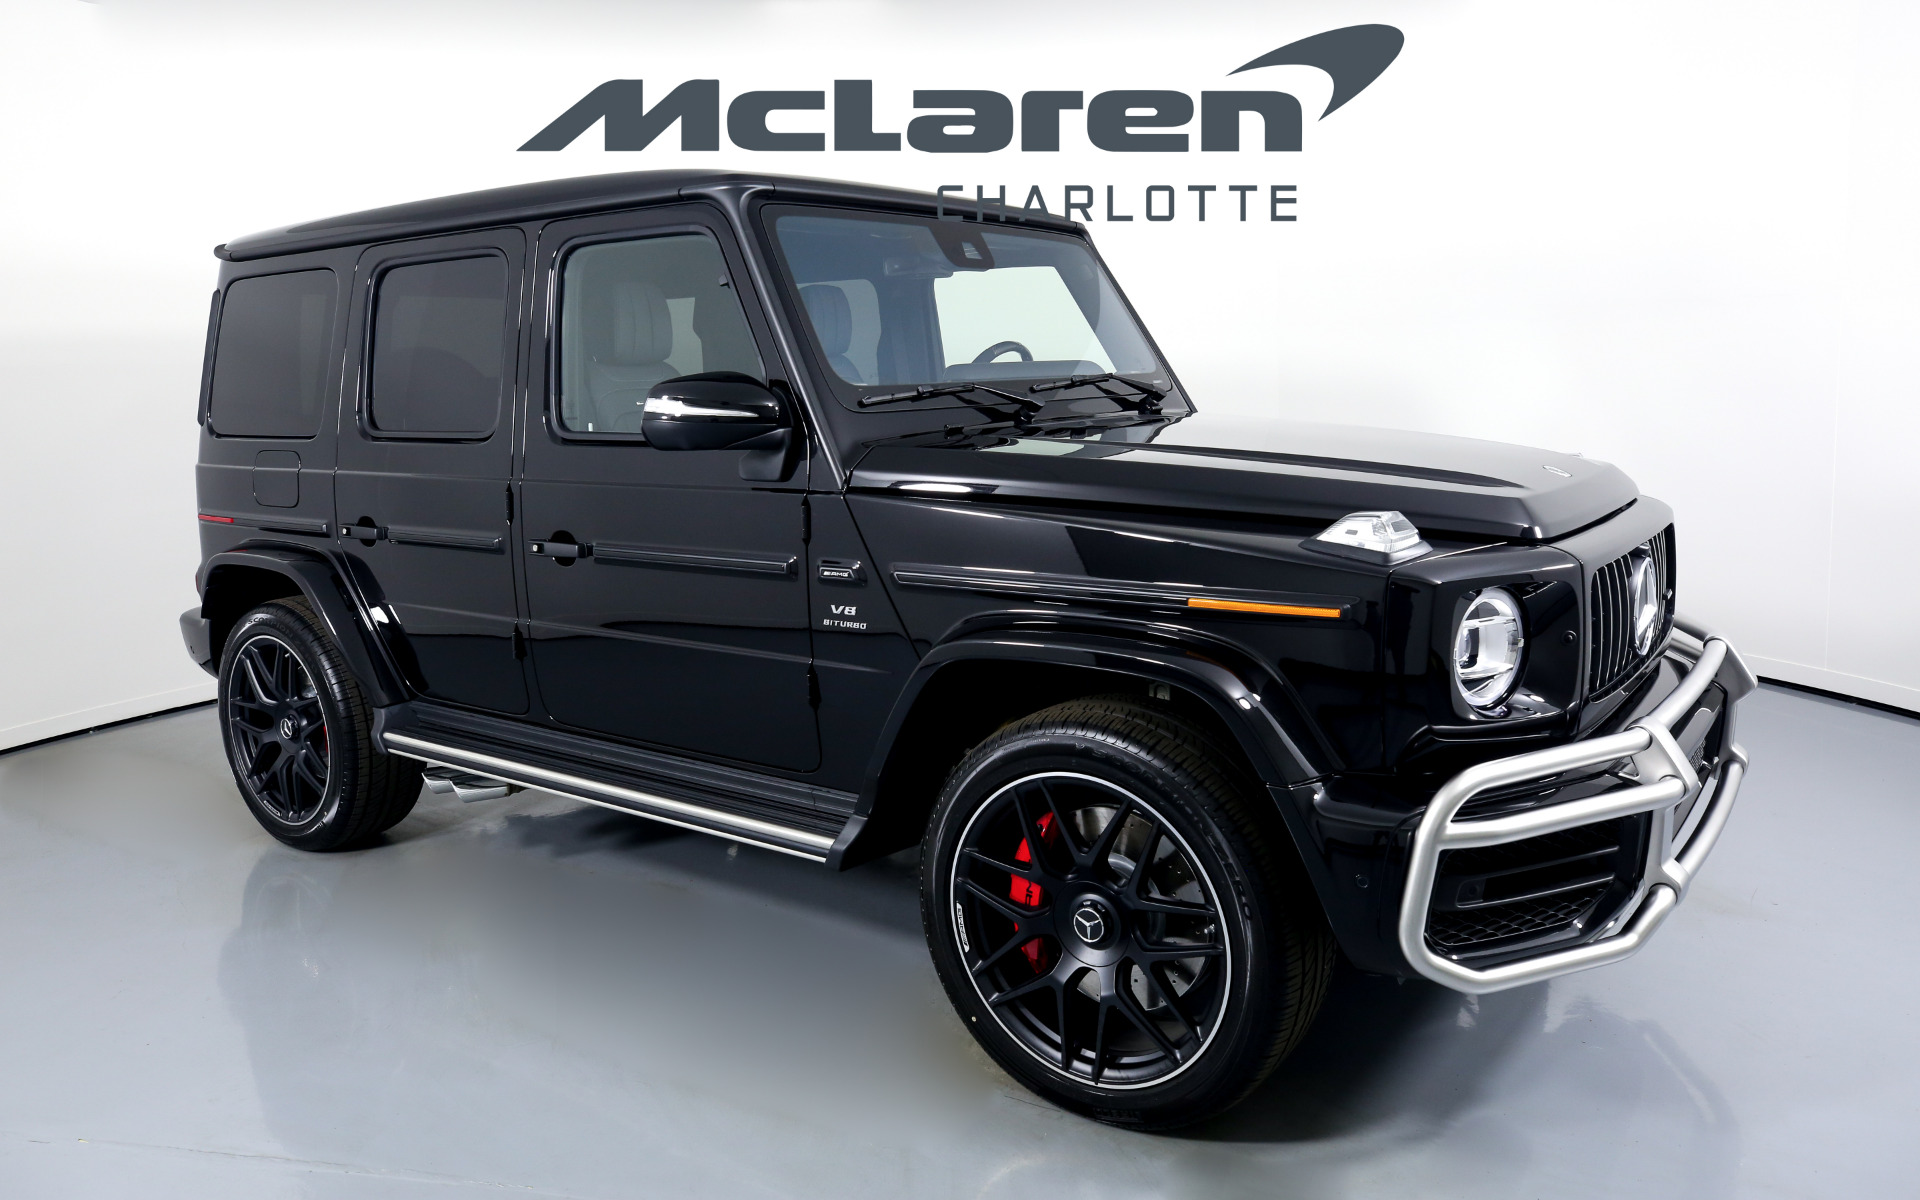 Used 21 Mercedes Benz G Class Amg G 63 For Sale 269 996 Mclaren Charlotte Stock